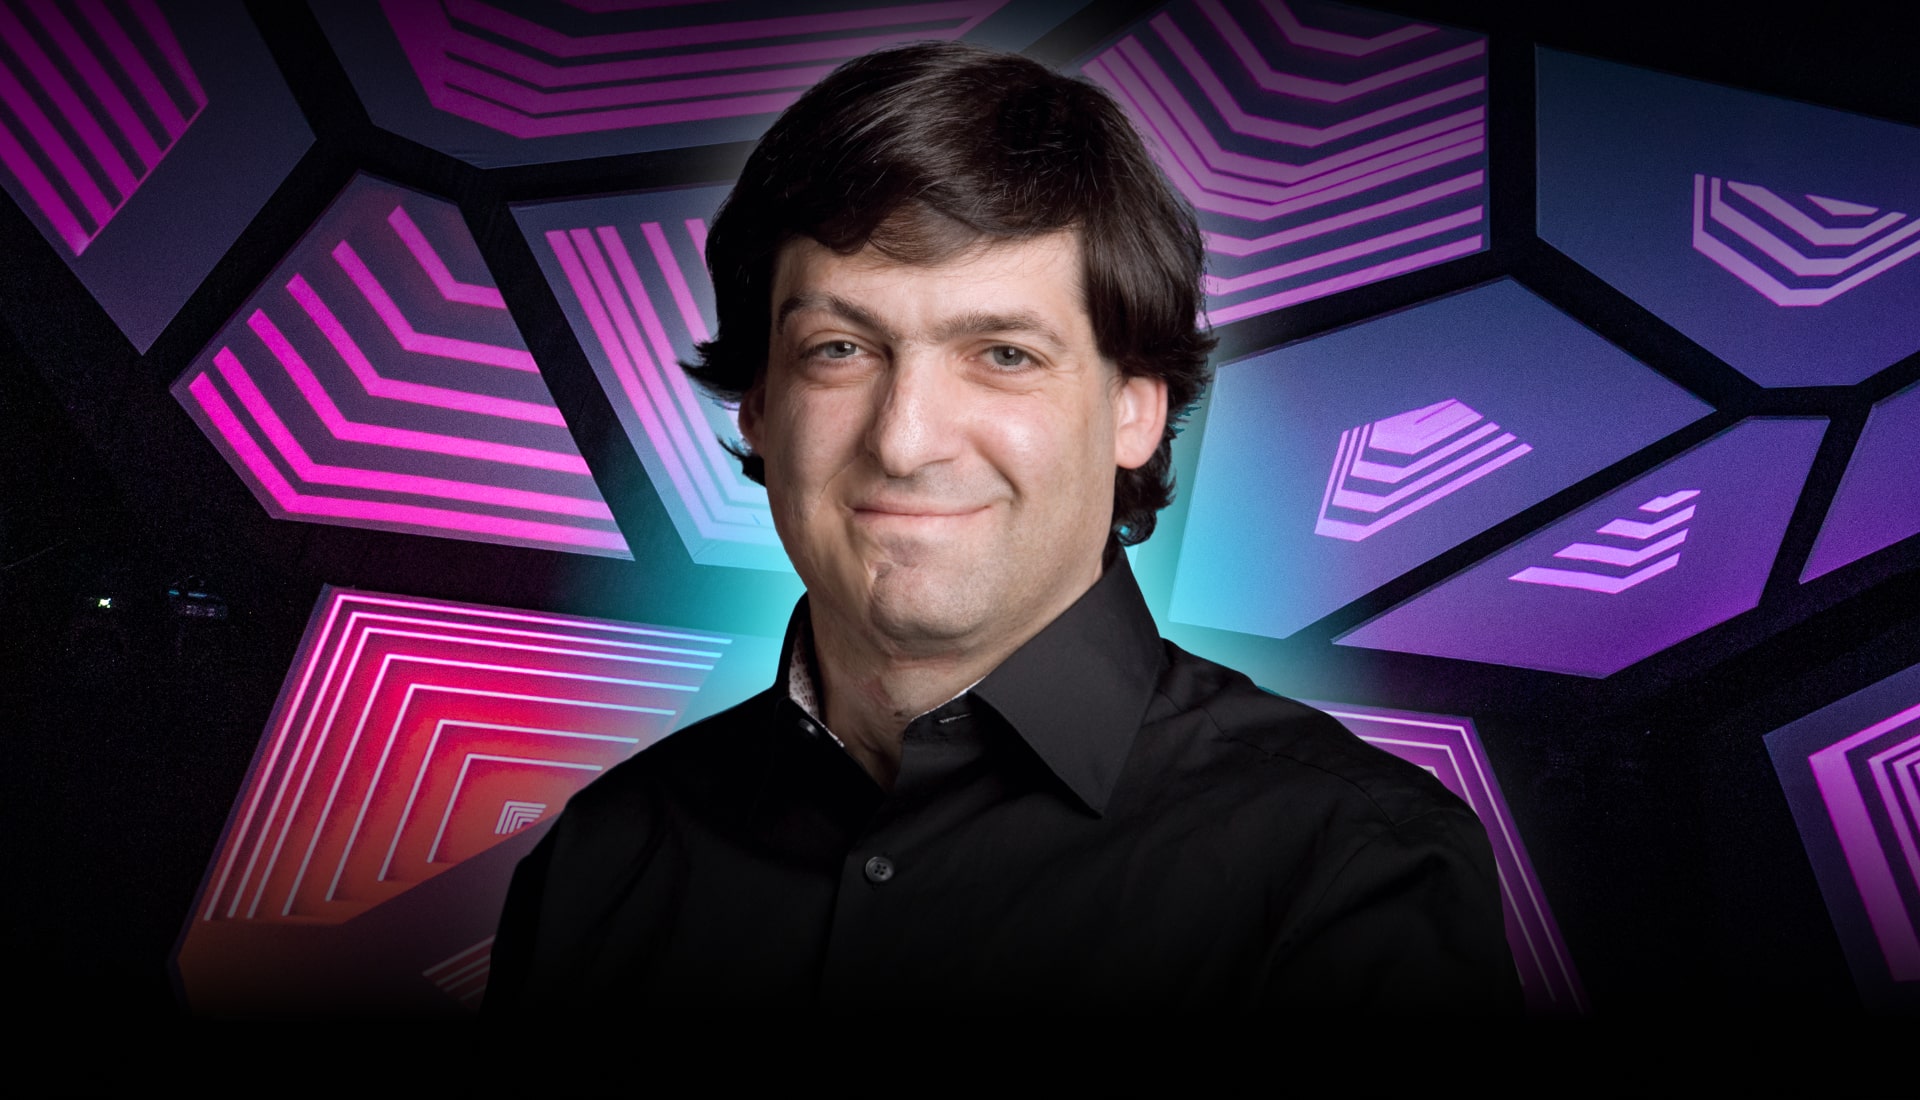 Learn about your customer’s buying behaviour from Dan Ariely, at BRAND MINDS 2022